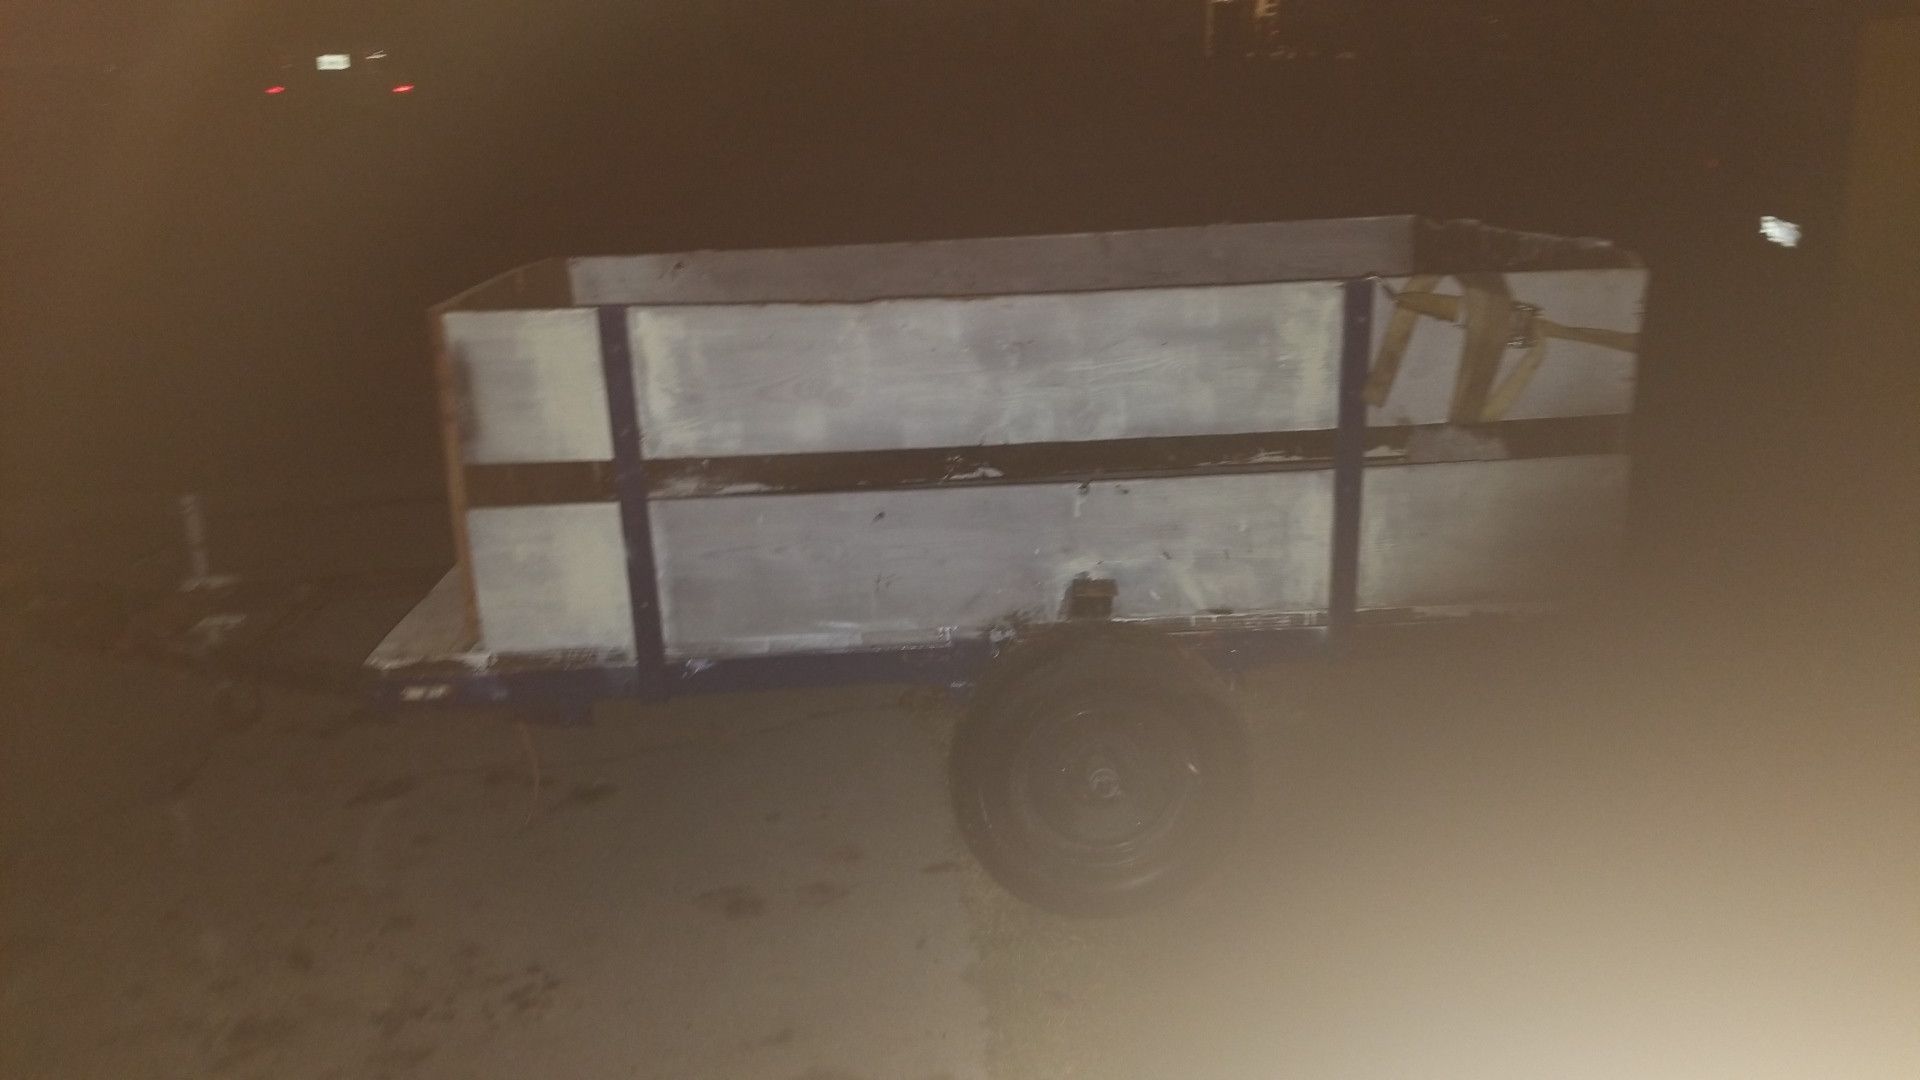 4 by 8' trailer new wheels